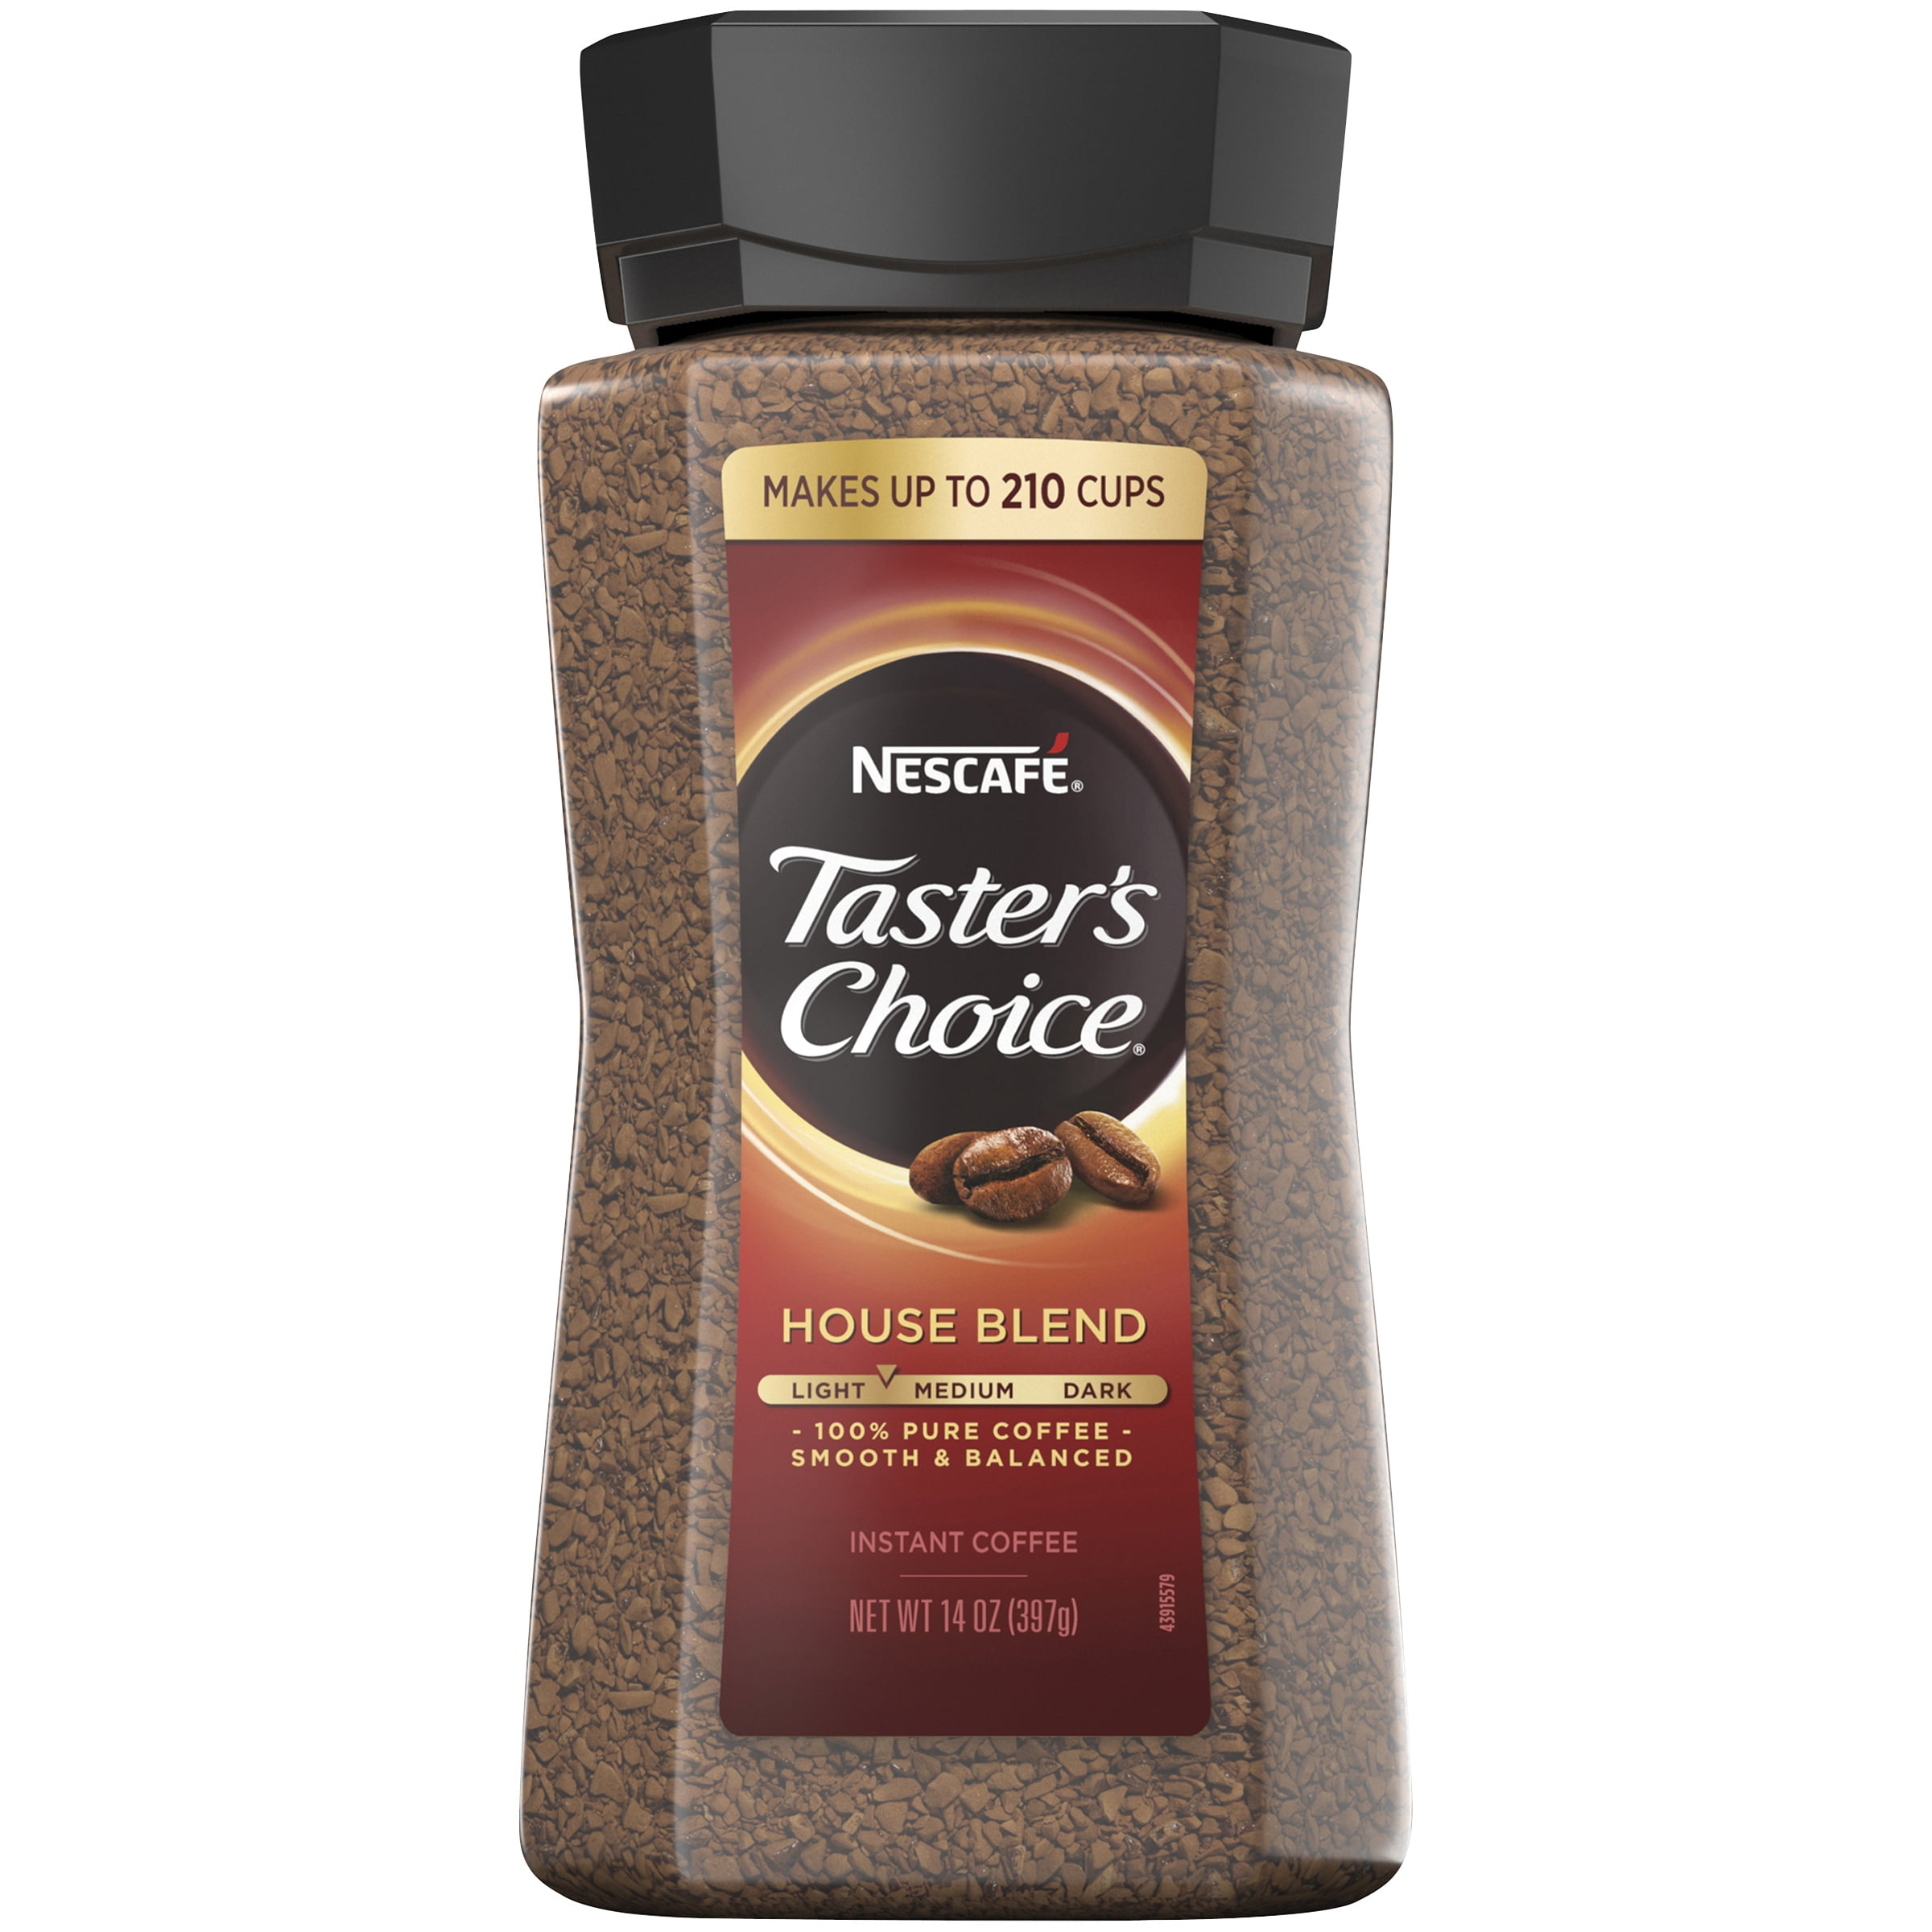 Delta Instant Coffee 10 x 2g - Instant Coffee - Coffee - Tea, Coffee & Hot  Chocolate - Pantry - Products - Supermercado Apolónia